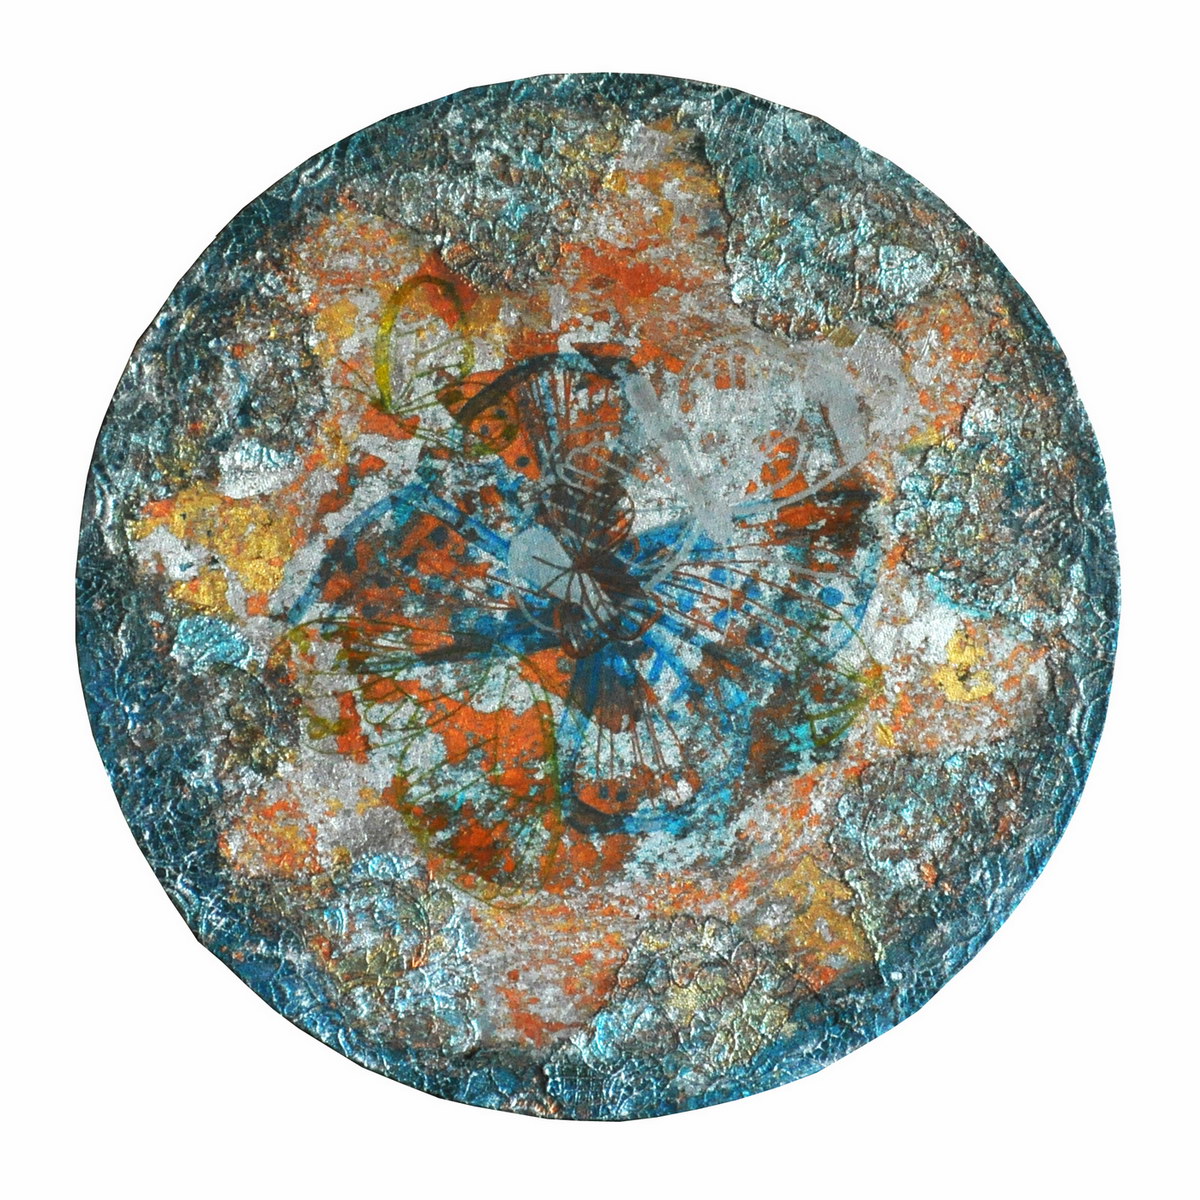 5th Dimension Earth II (40cm) mixed media on round canvas